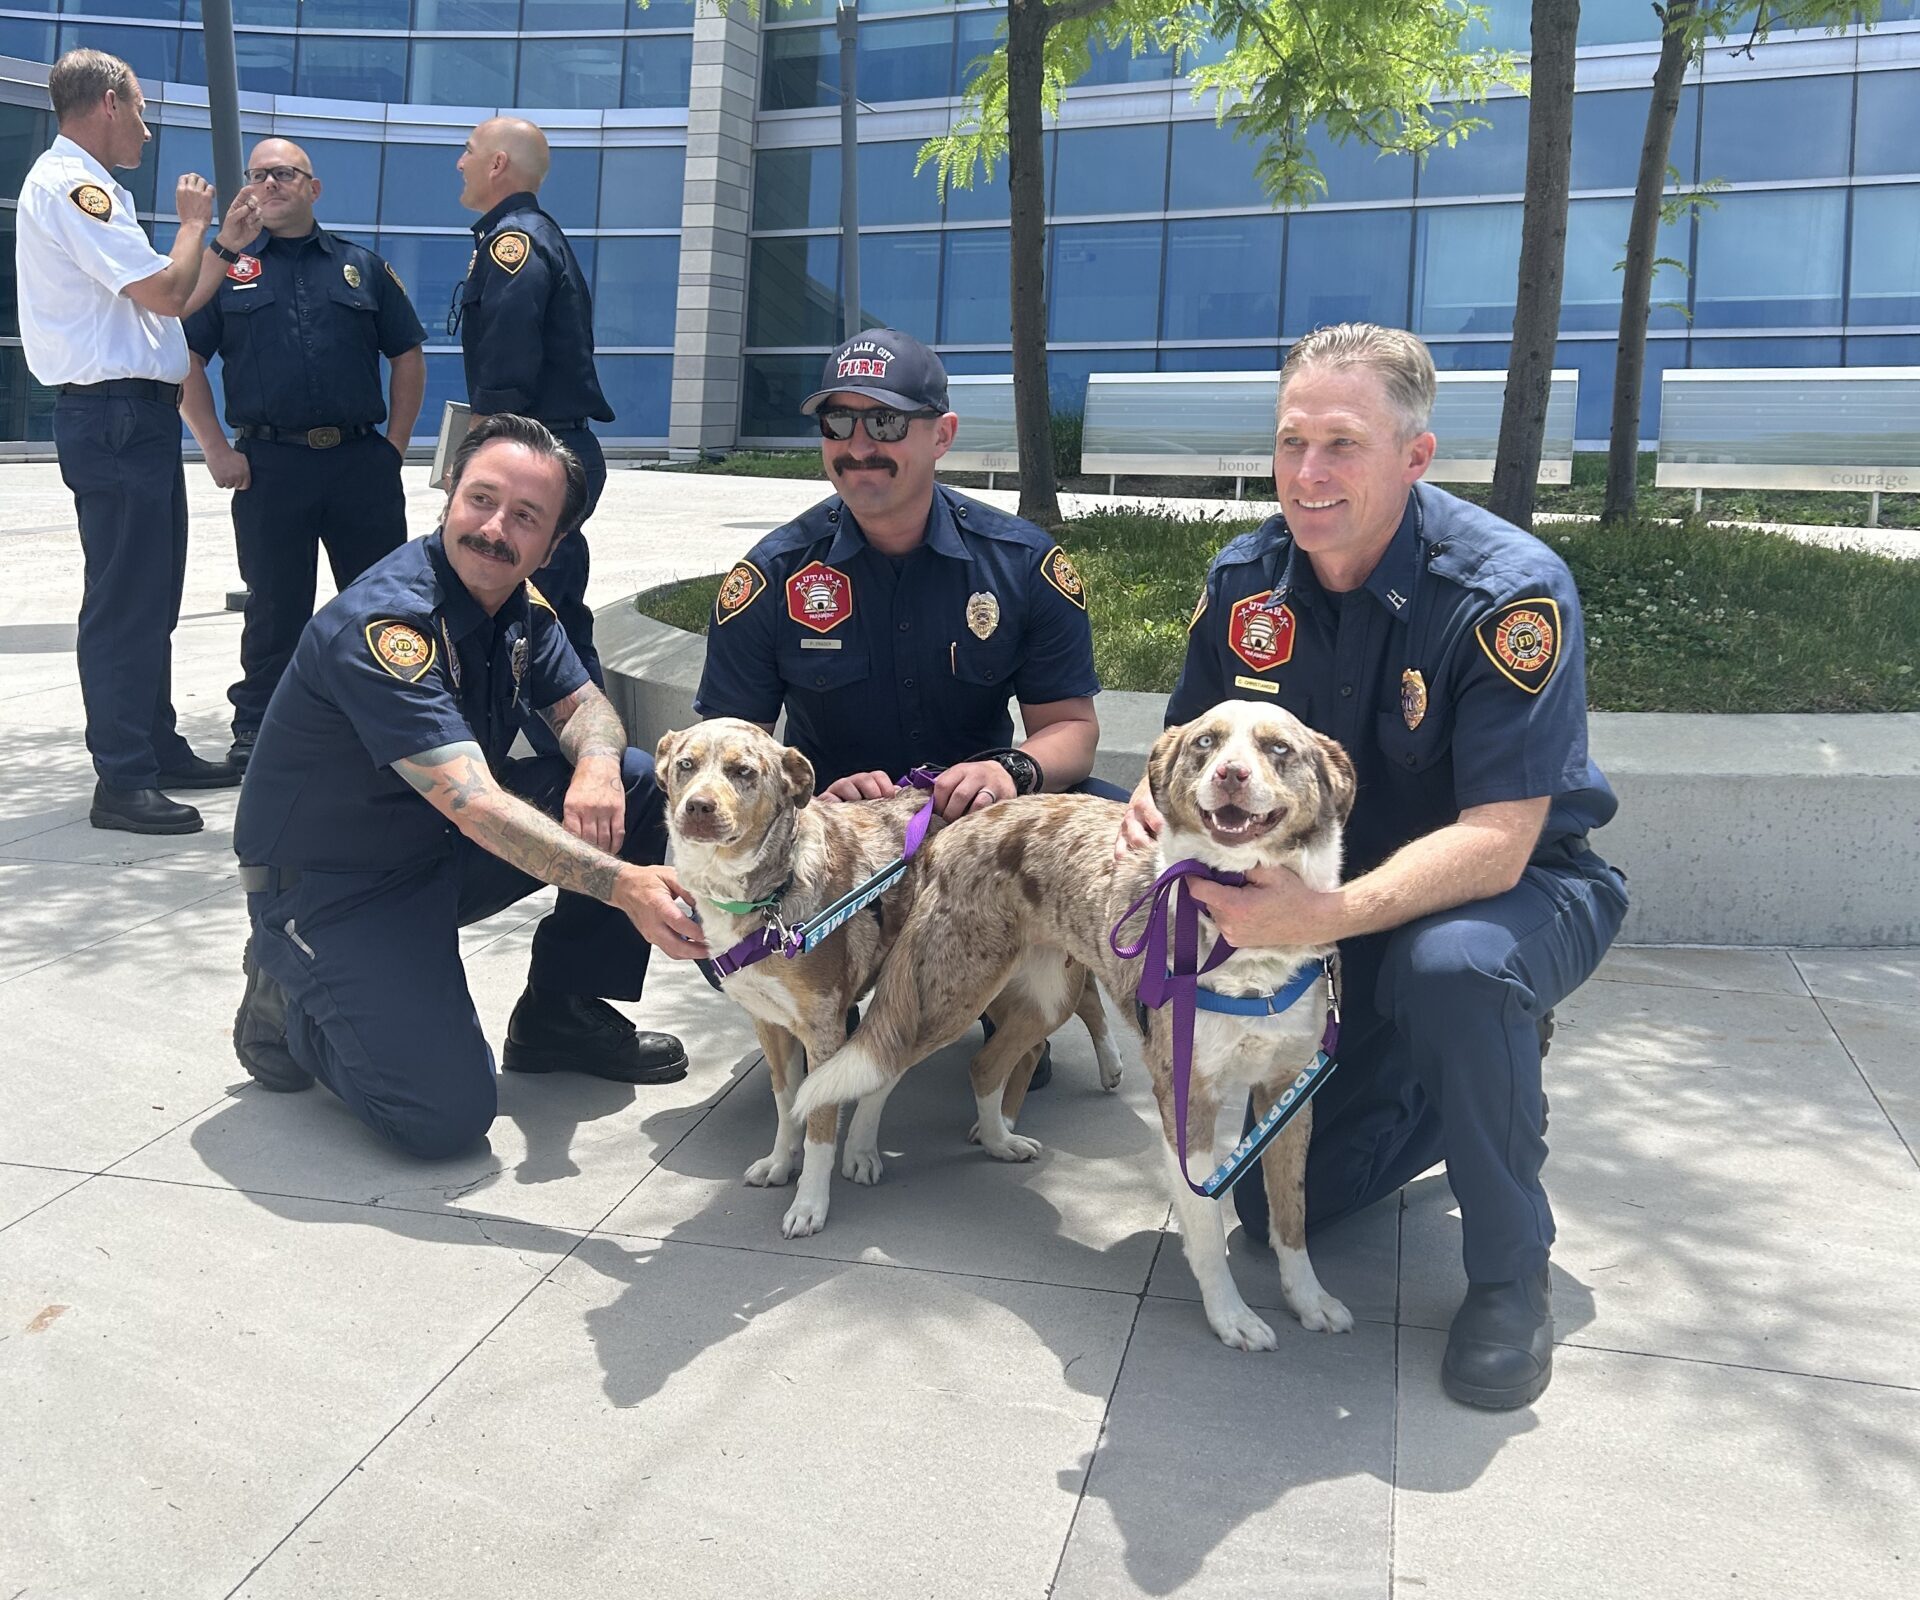 SLC Fire Department Joins Forces with HSU to Protect Pets in Hot Cars